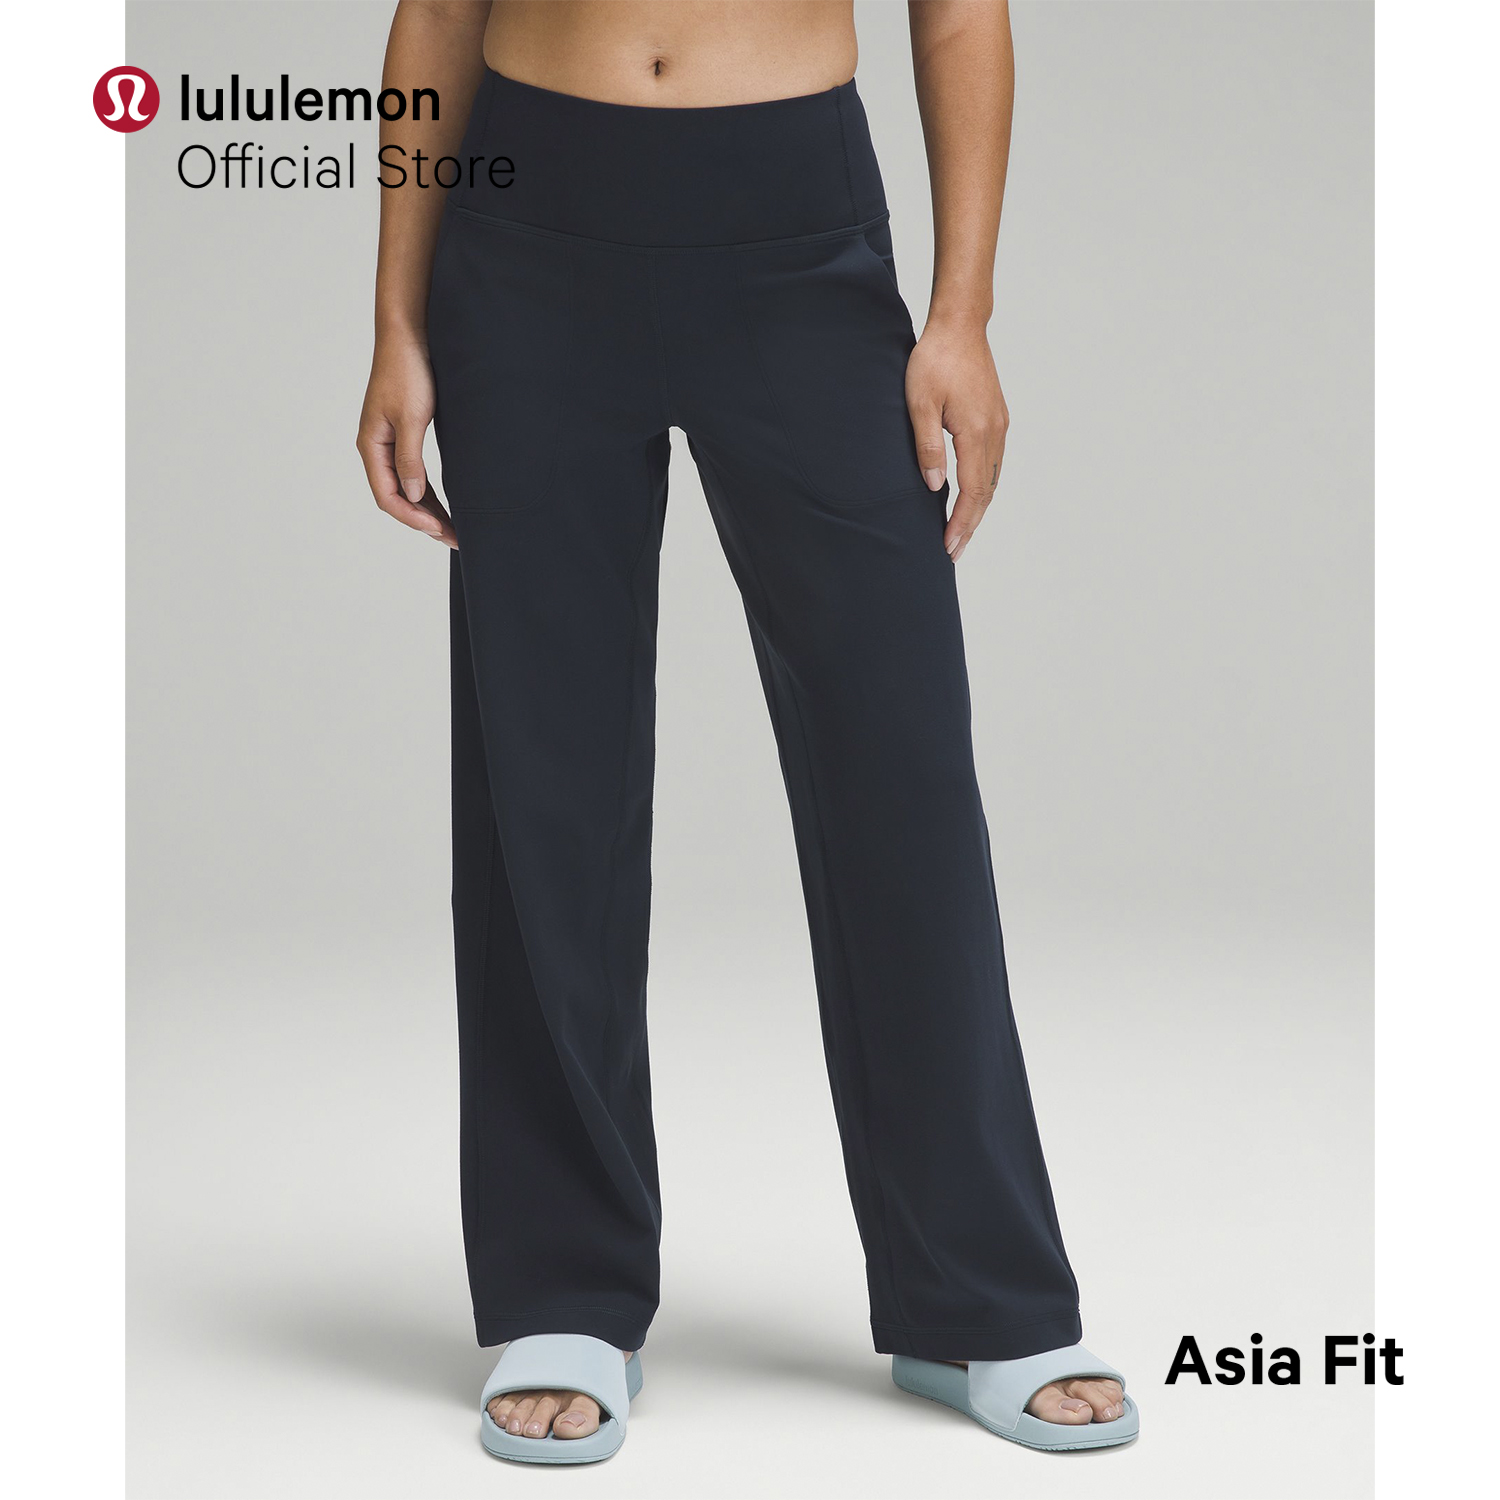 lululemon Women's Groove Super-High-Rise Flared Pant Nulu - Asia Fit